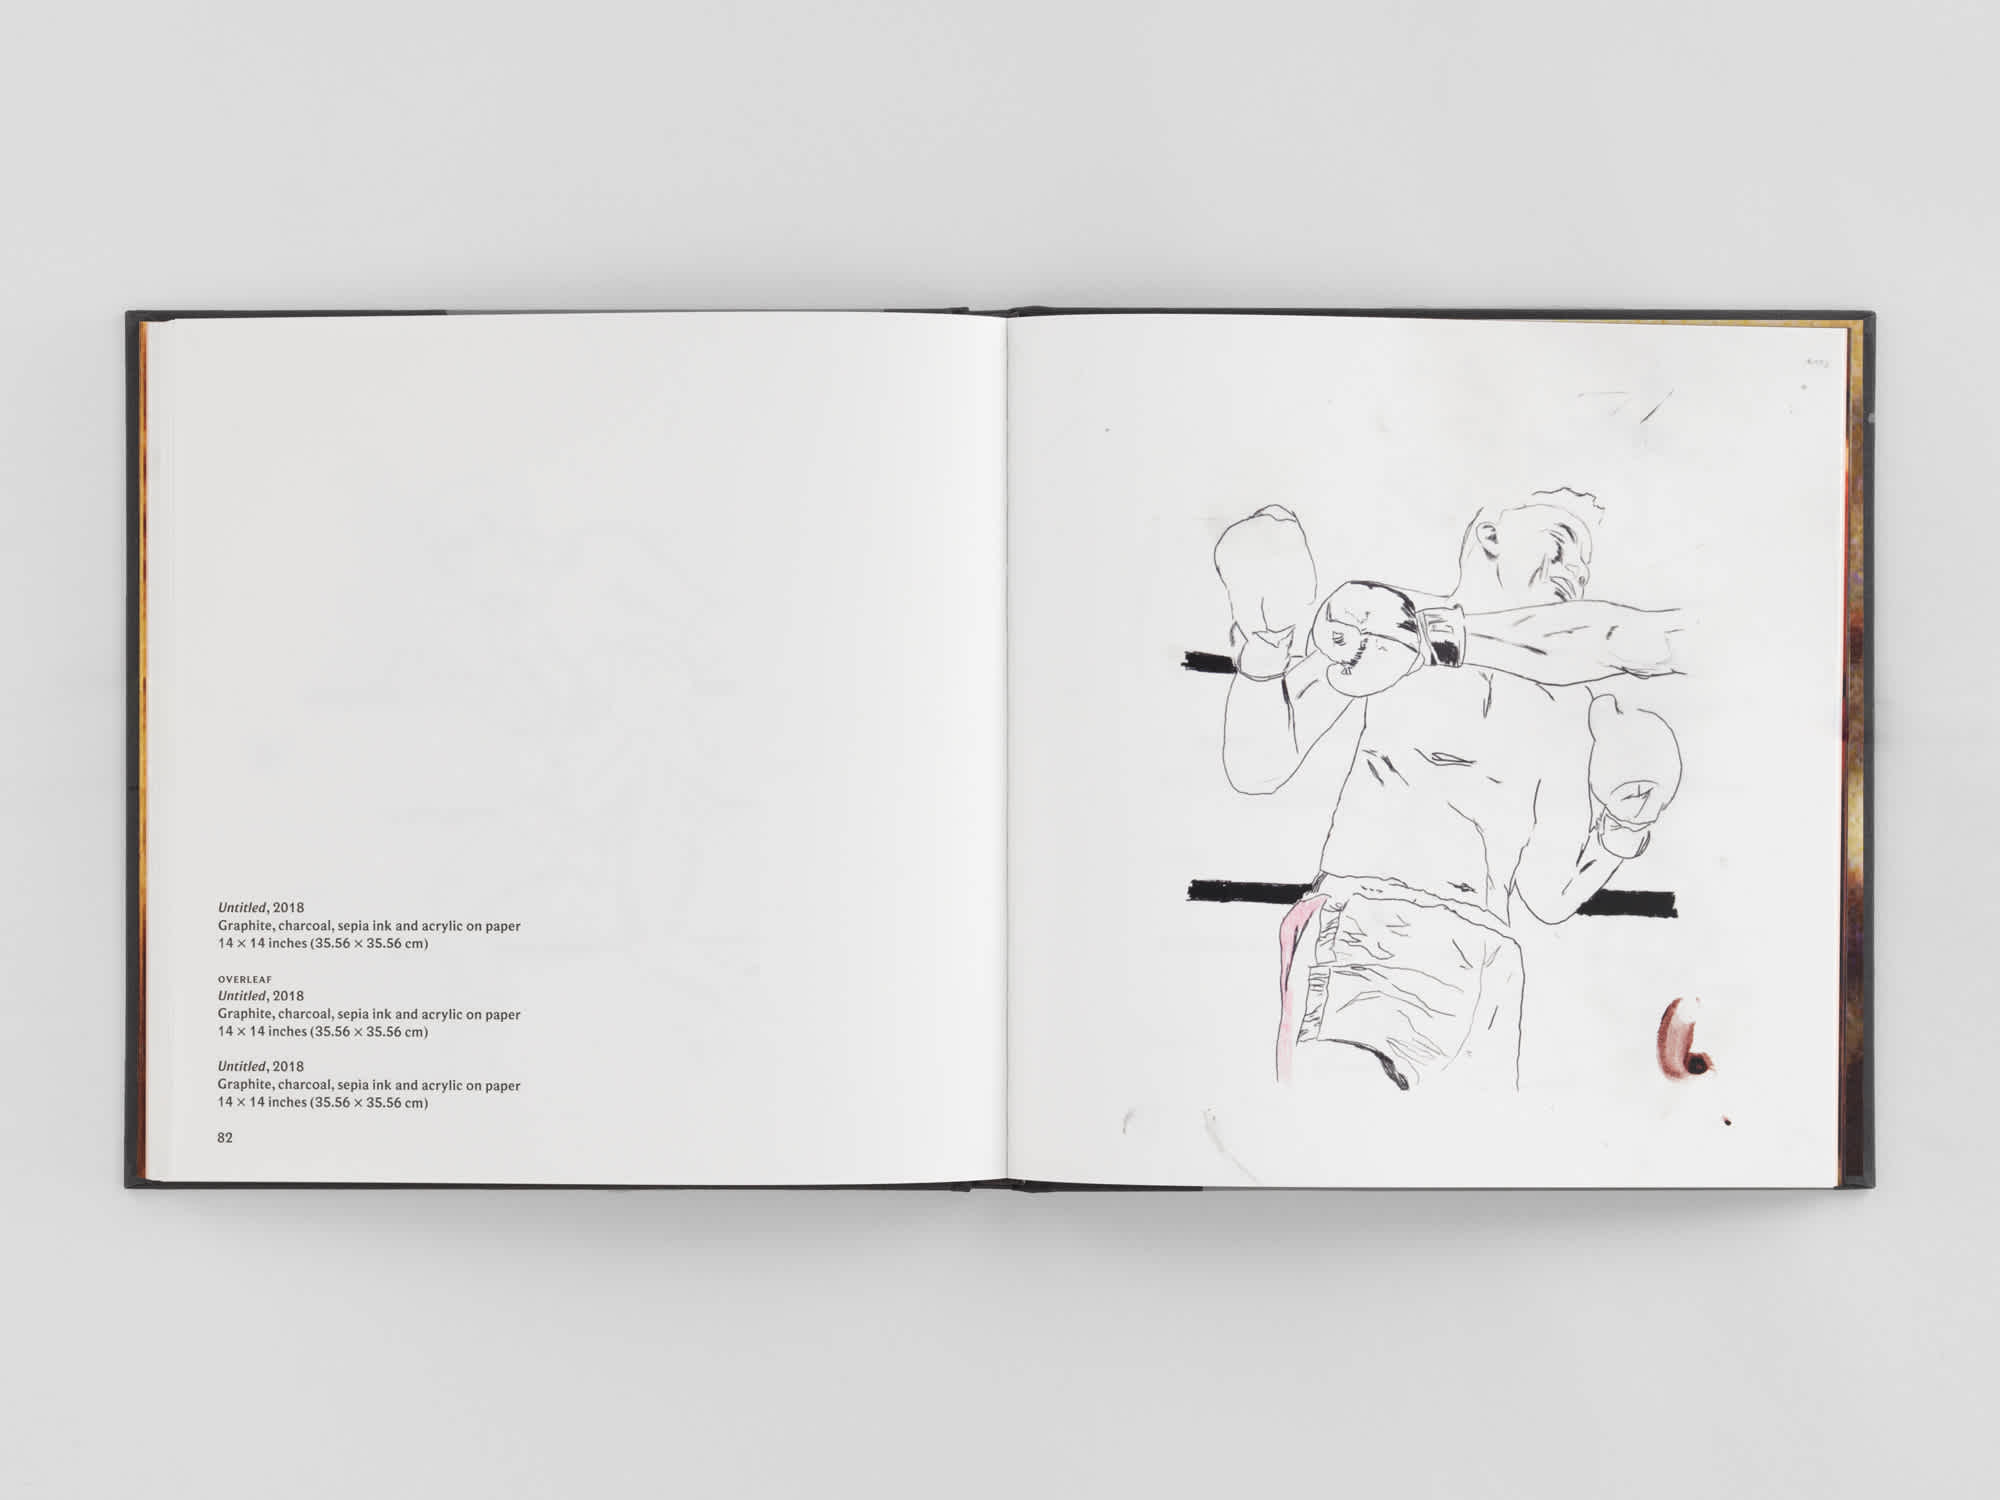 Open book with a sketch of a boxer on the right page and artwork information on the left.